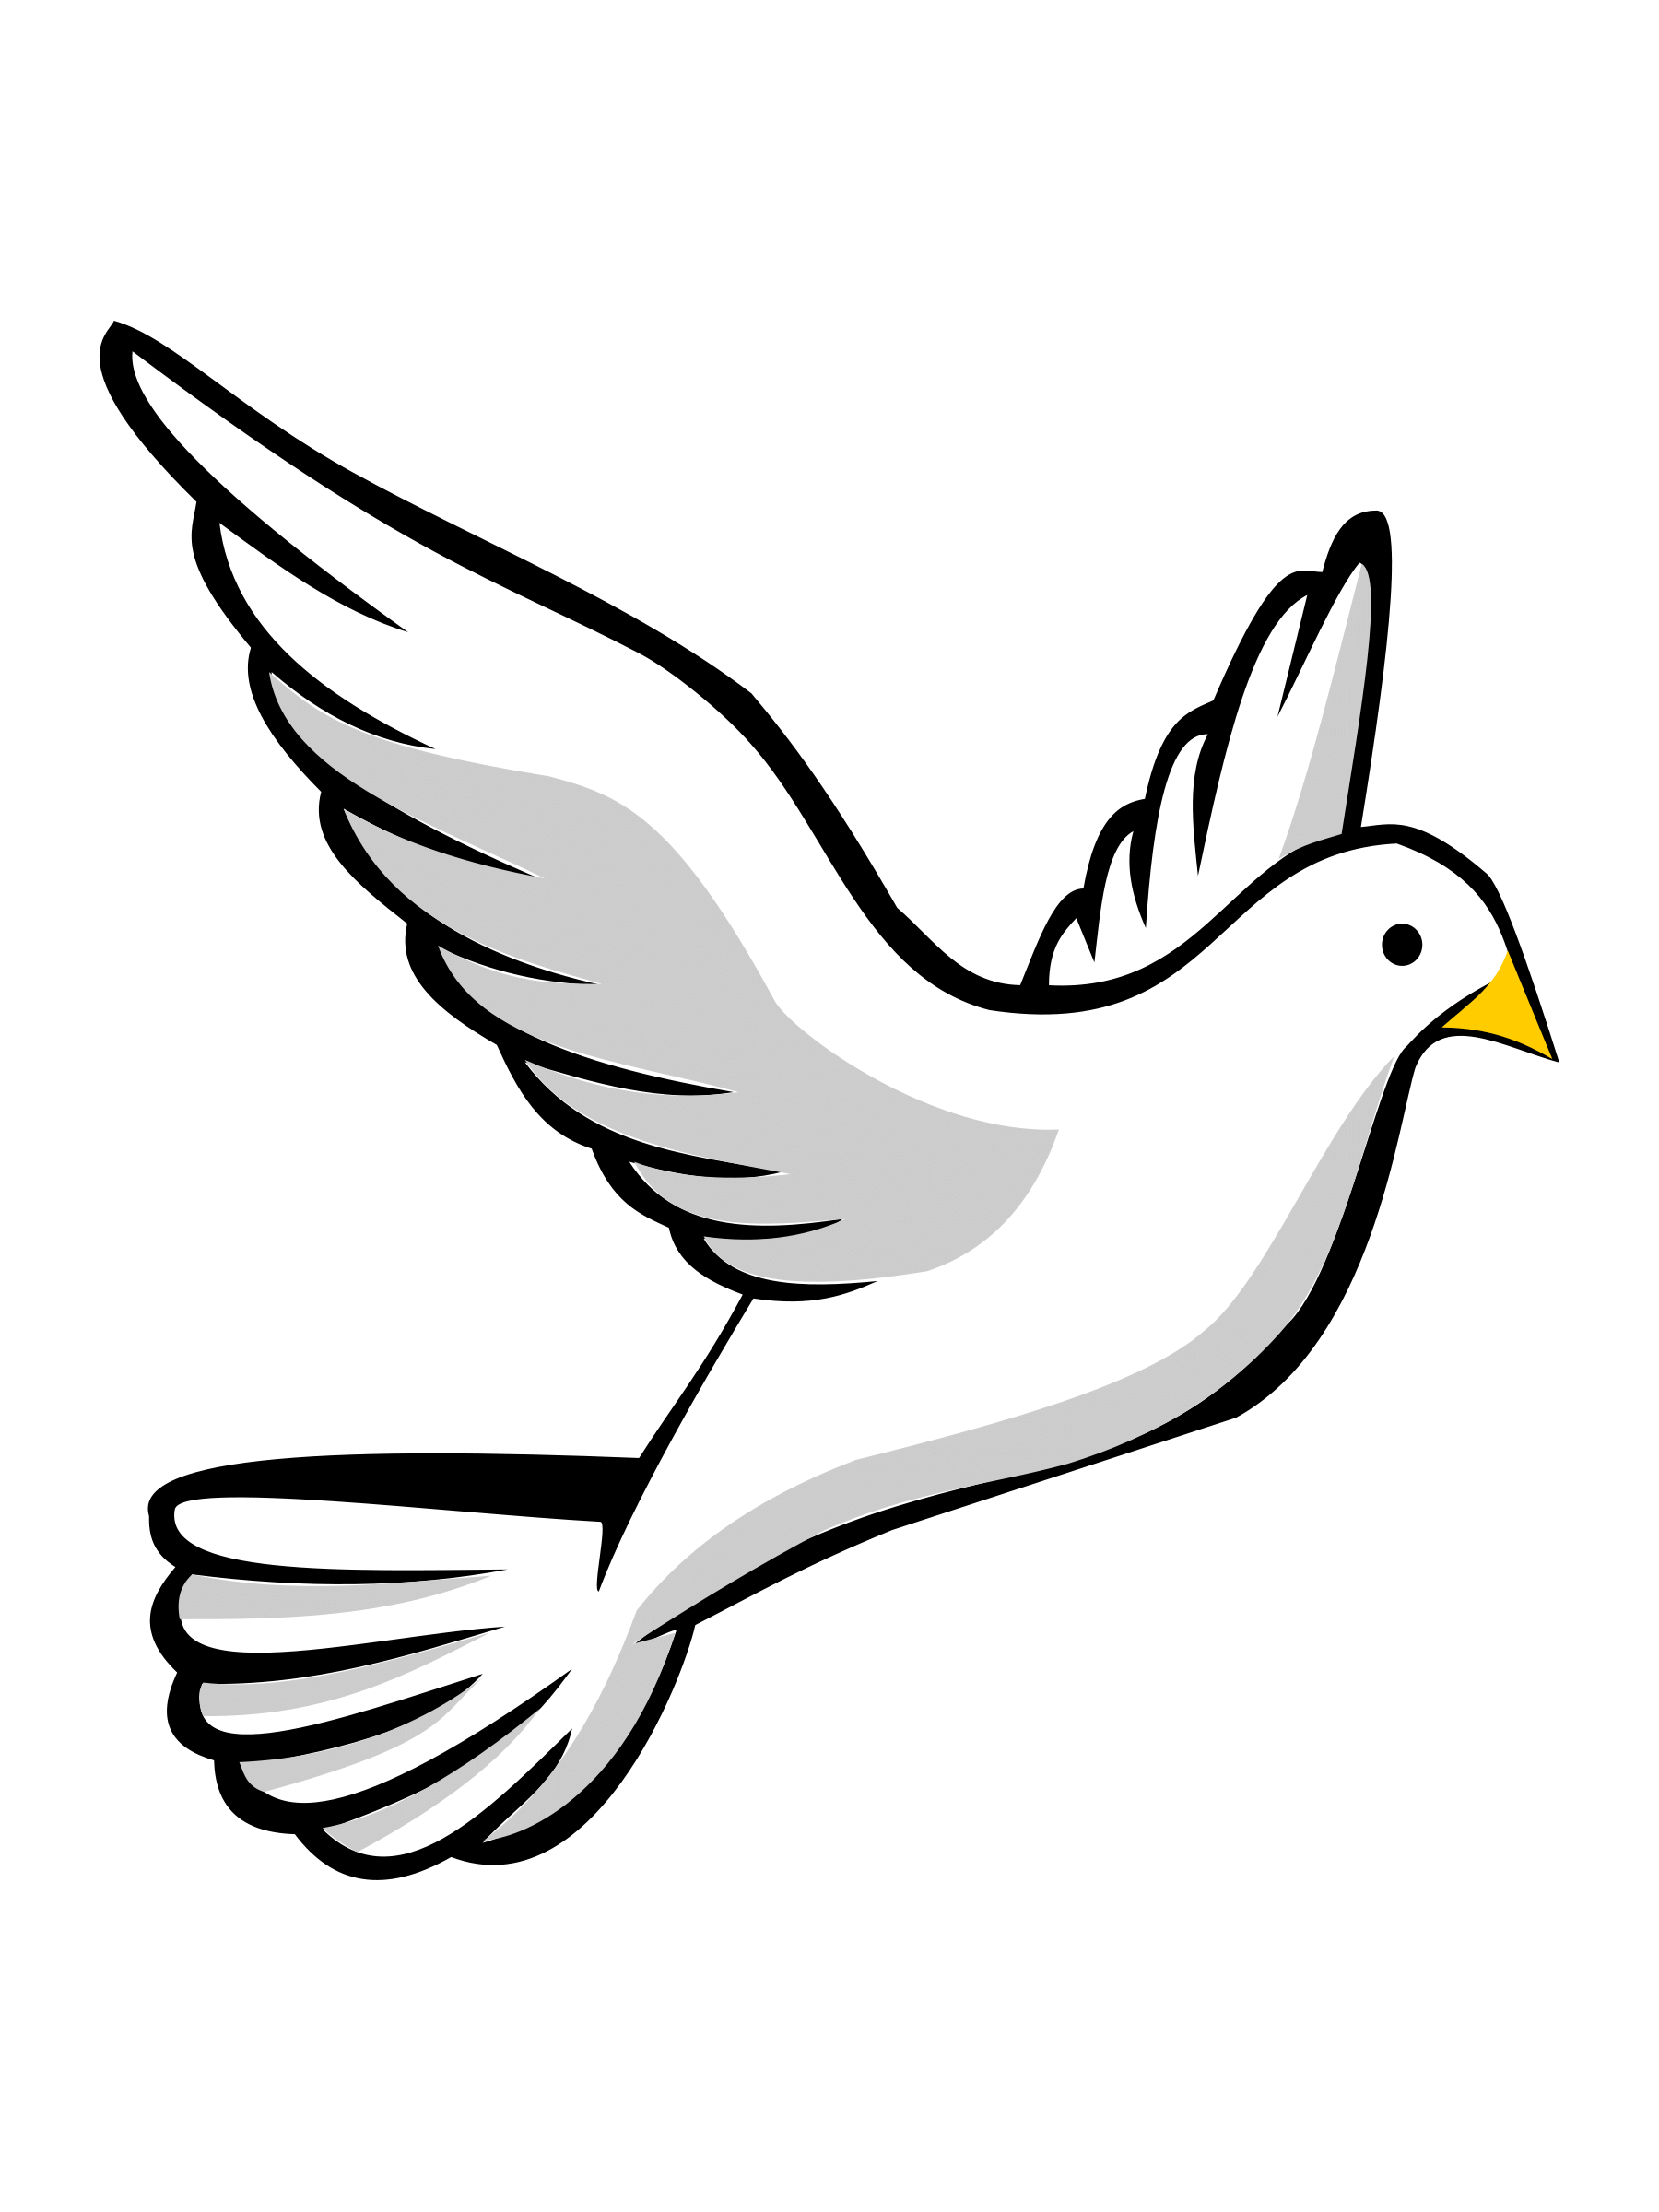 Flying bird drawing at. Fly clipart simple